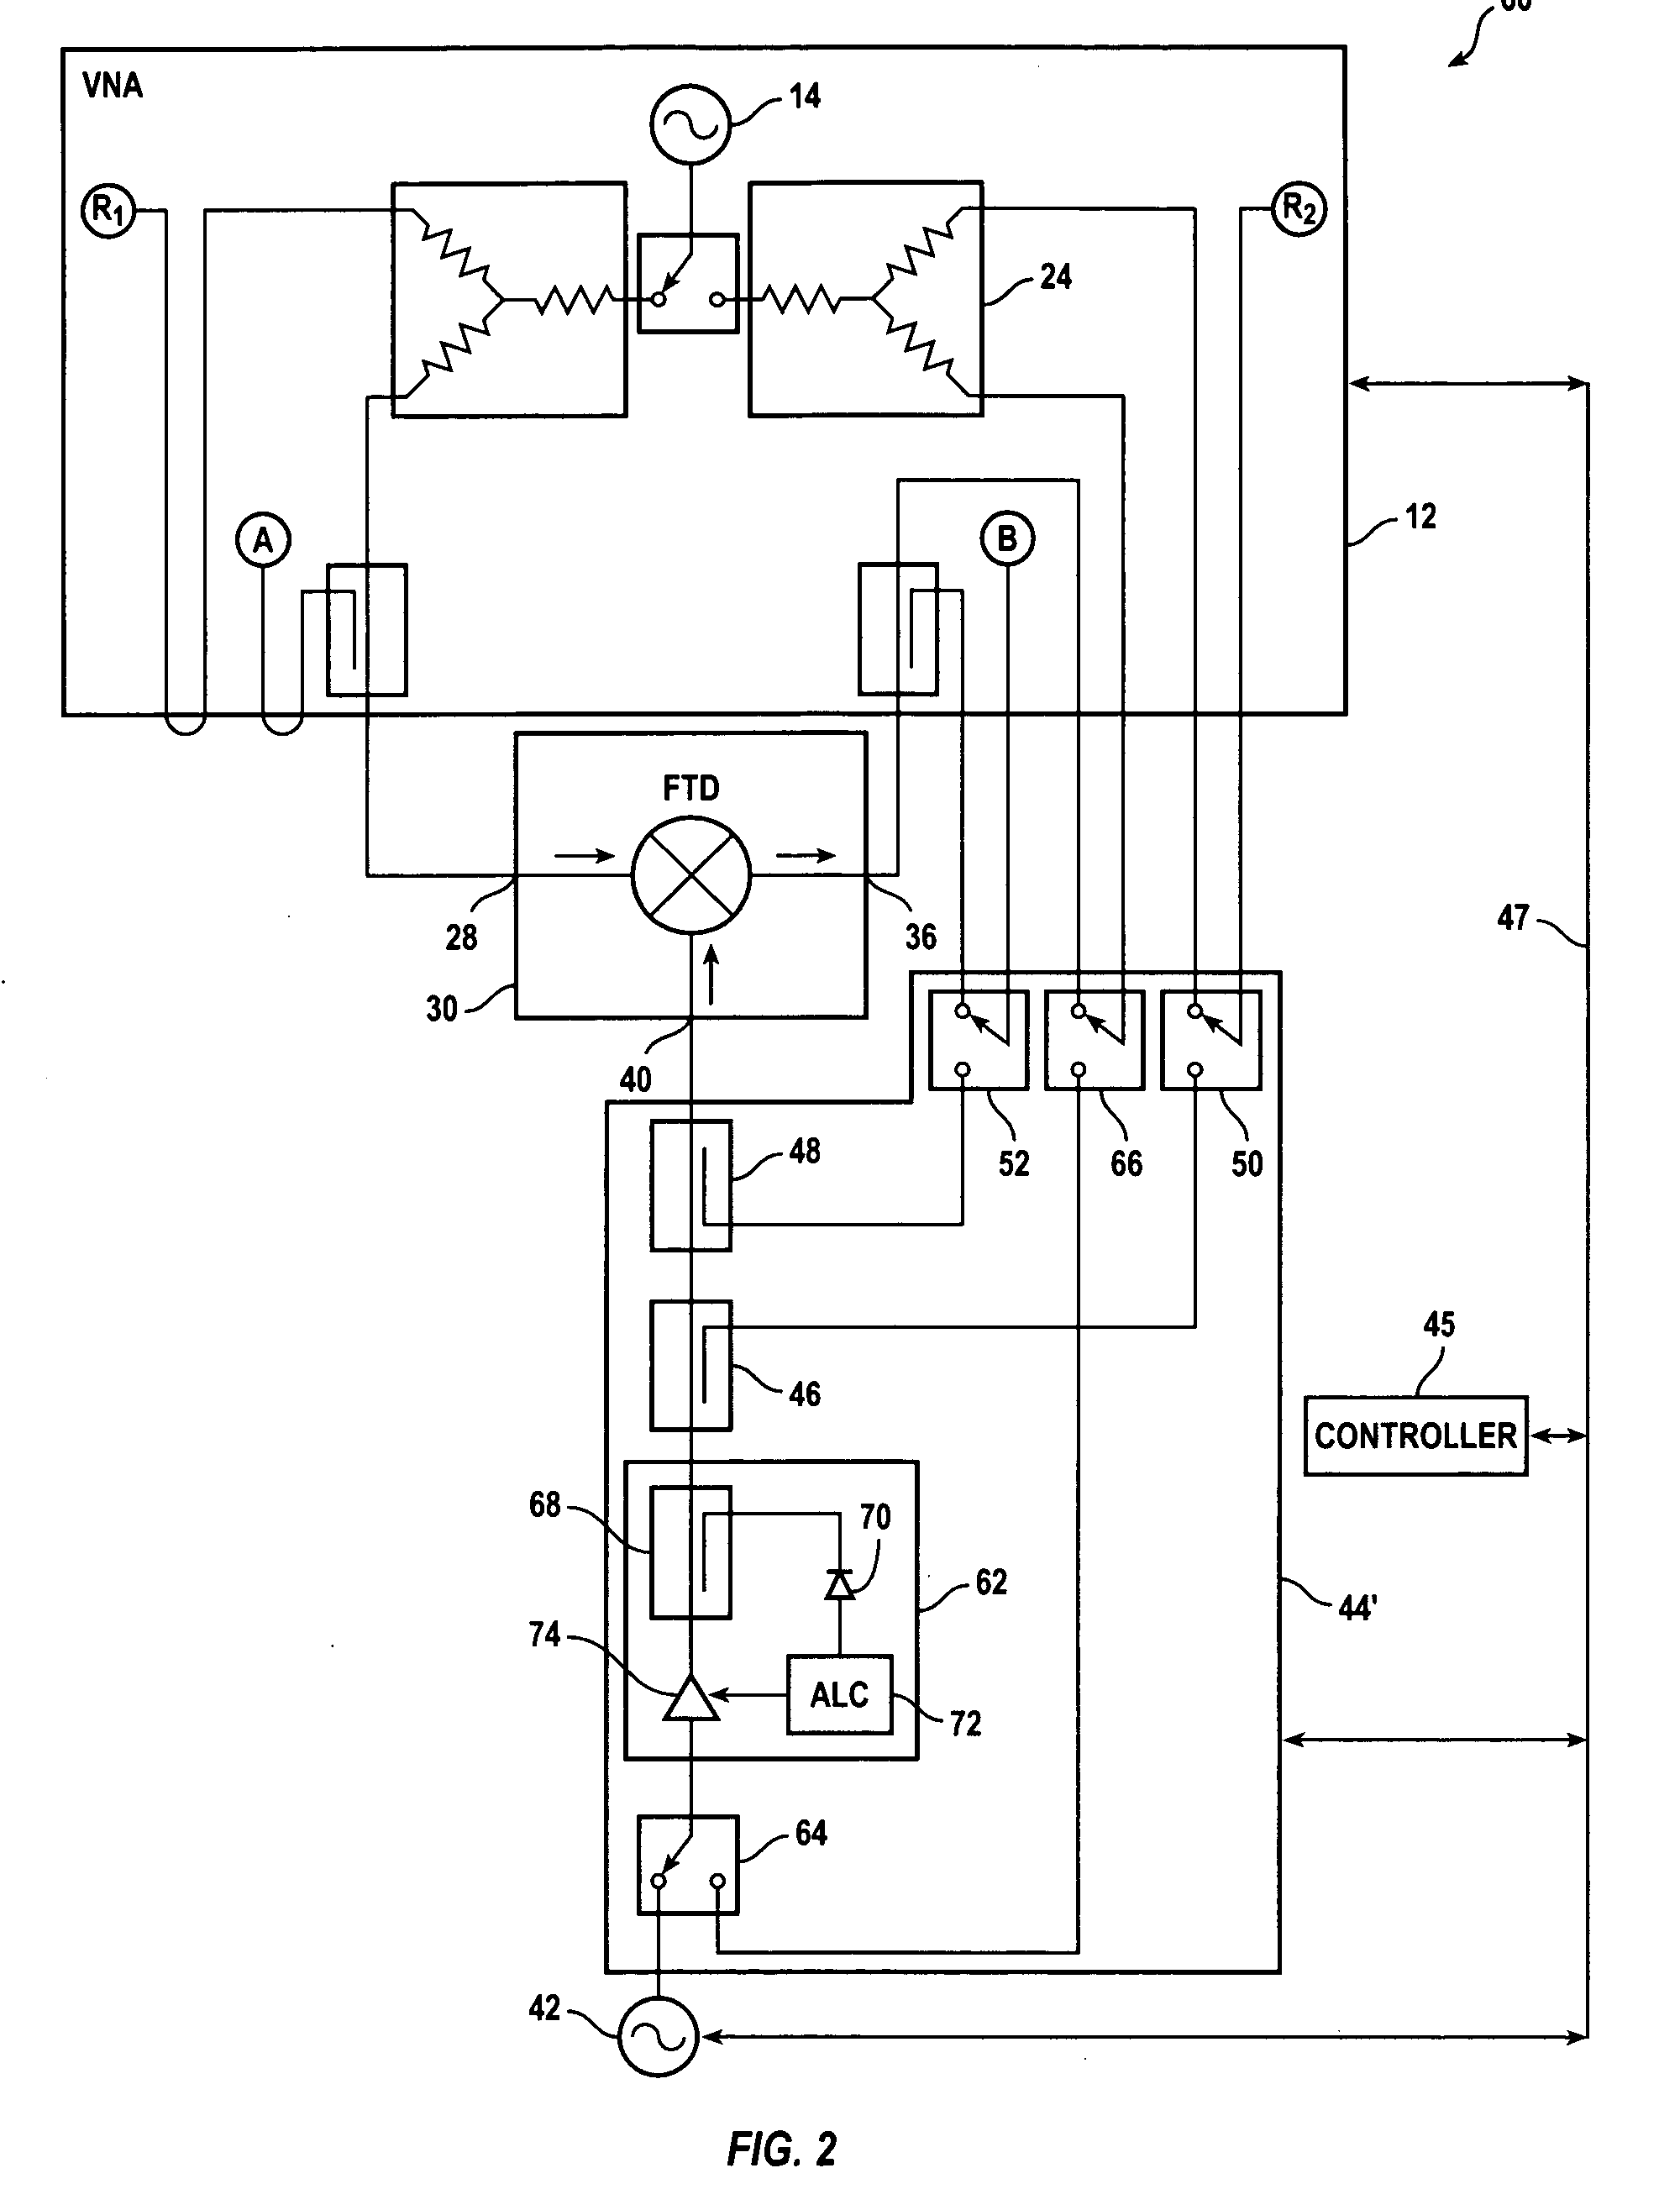 Method for measuring a three-port device using a two-port vector network analyzer